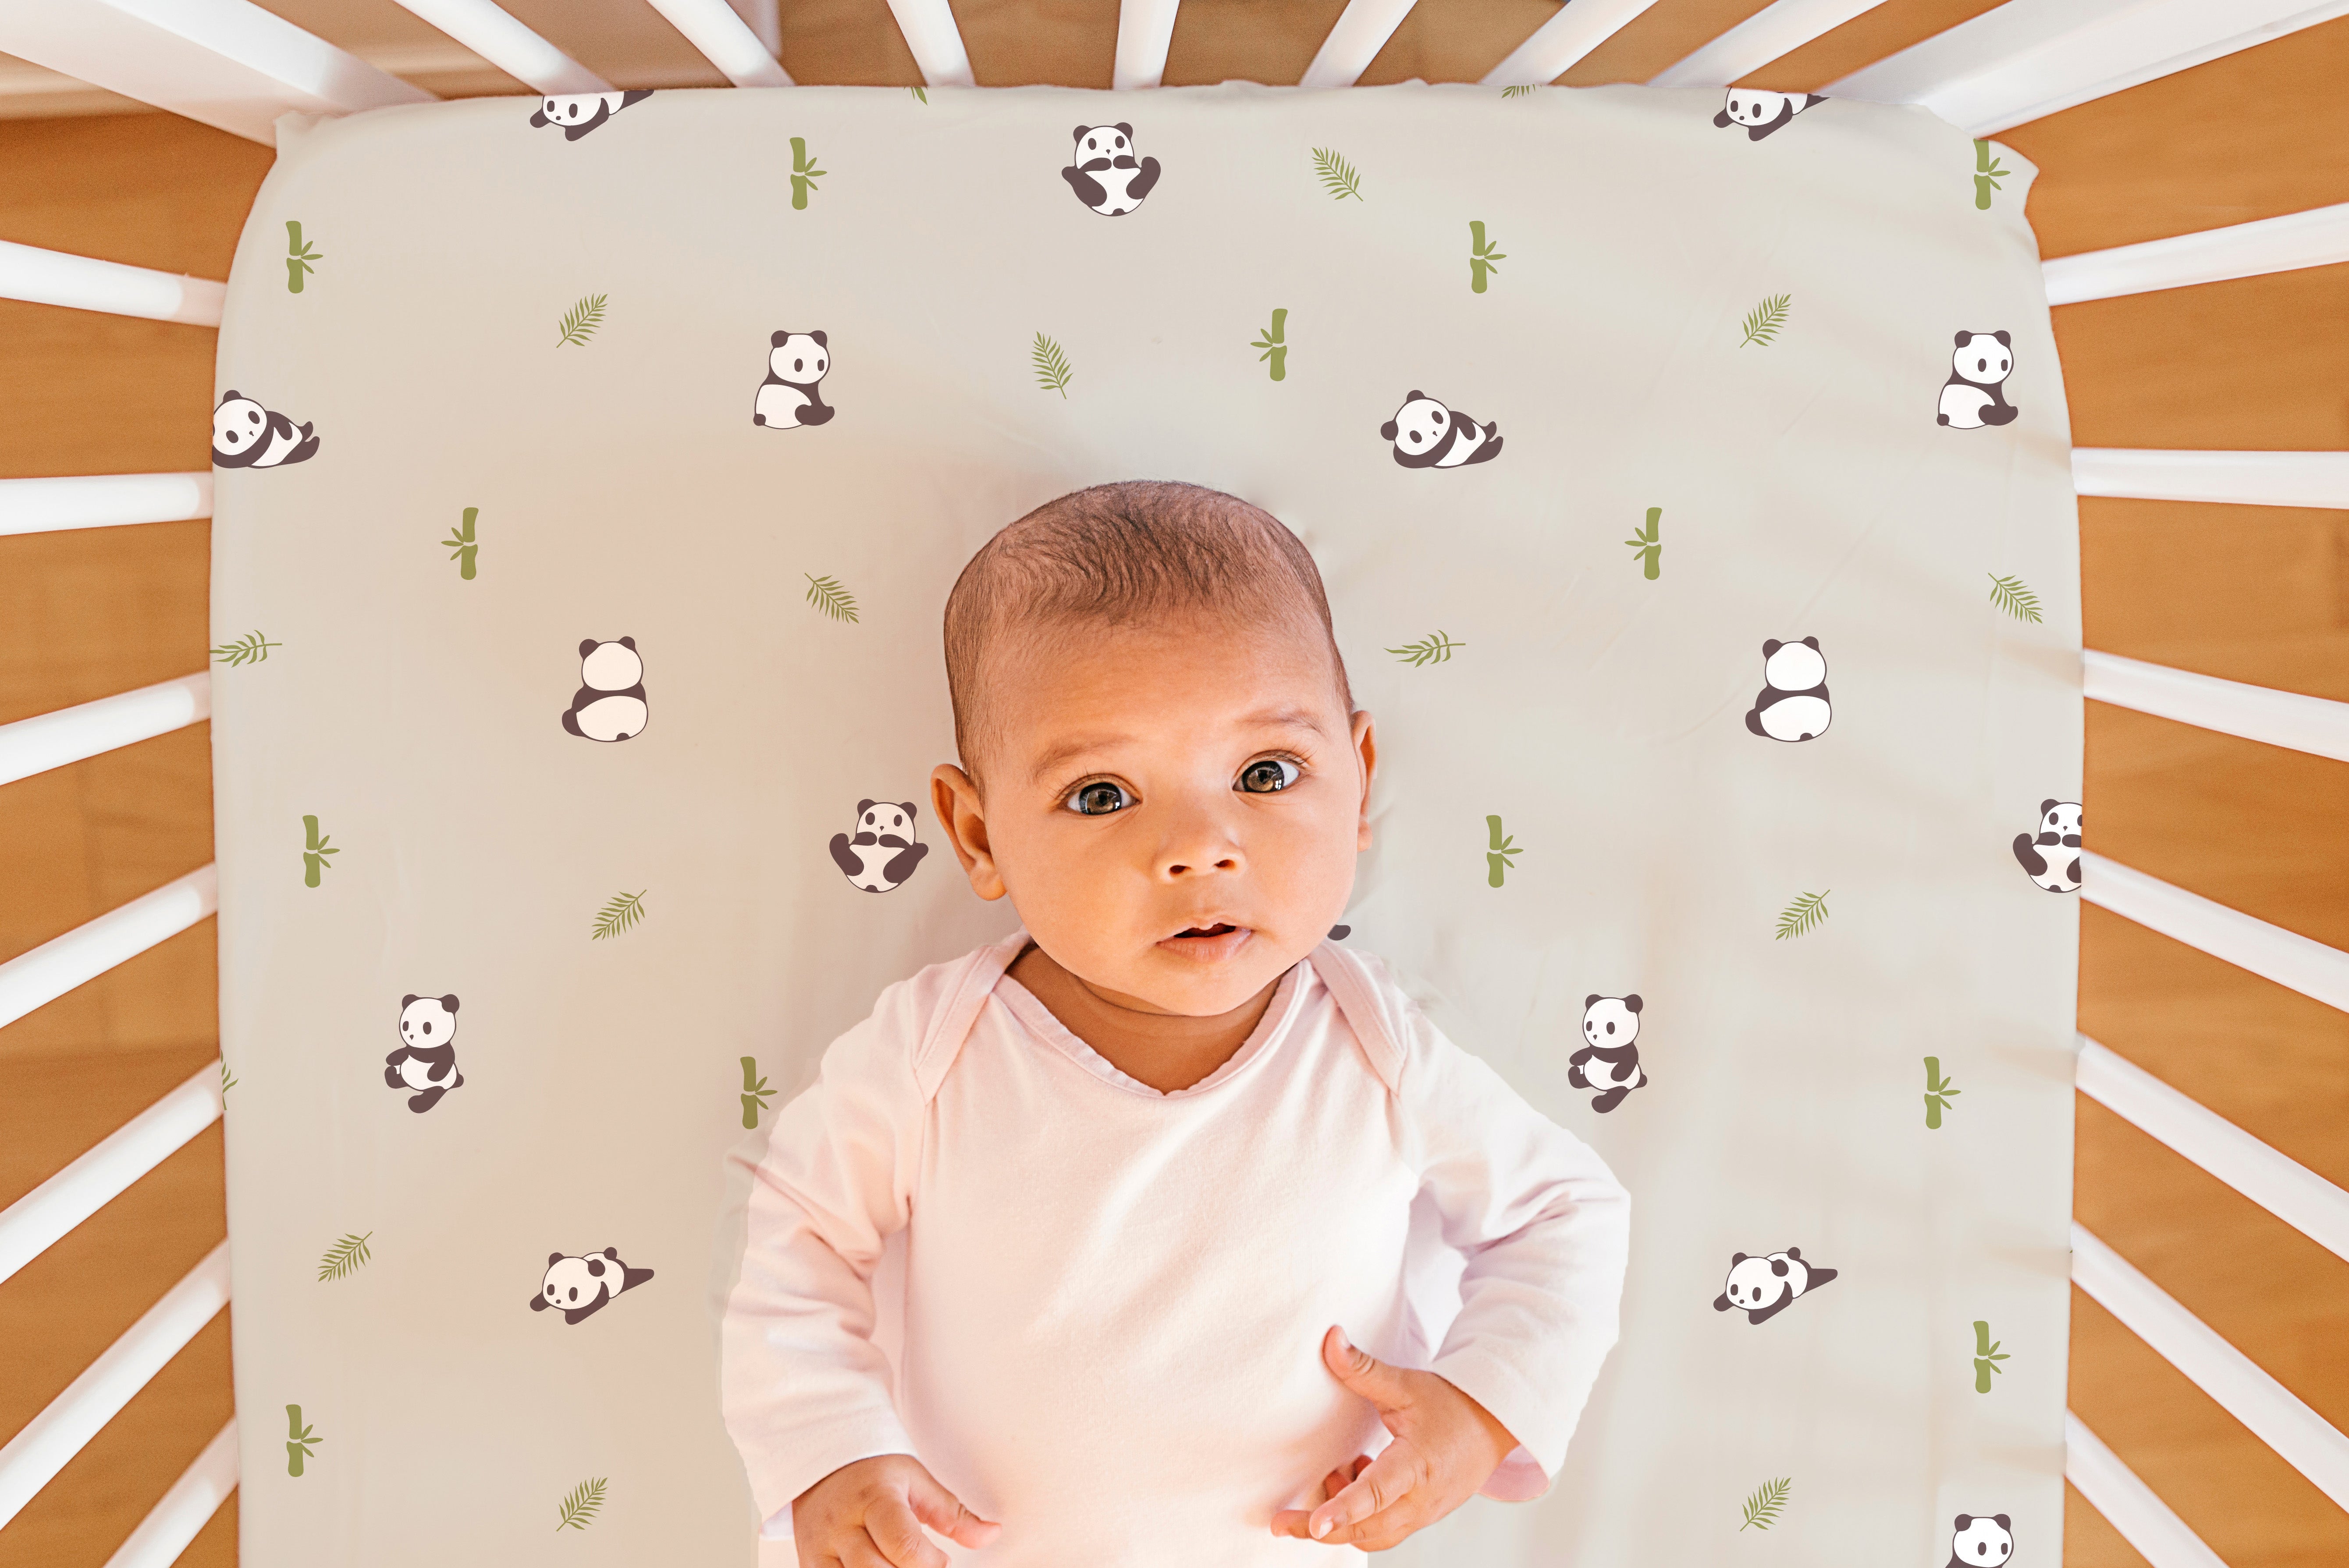 The White Cradle Flat Bed Sheet for Baby Cot & Mattress - Pure Organic Cotton - Extra Large, Super Soft & Smooth, Absorbent, Breathable Twill Fabric for Infants & Newborns - Grey Panda